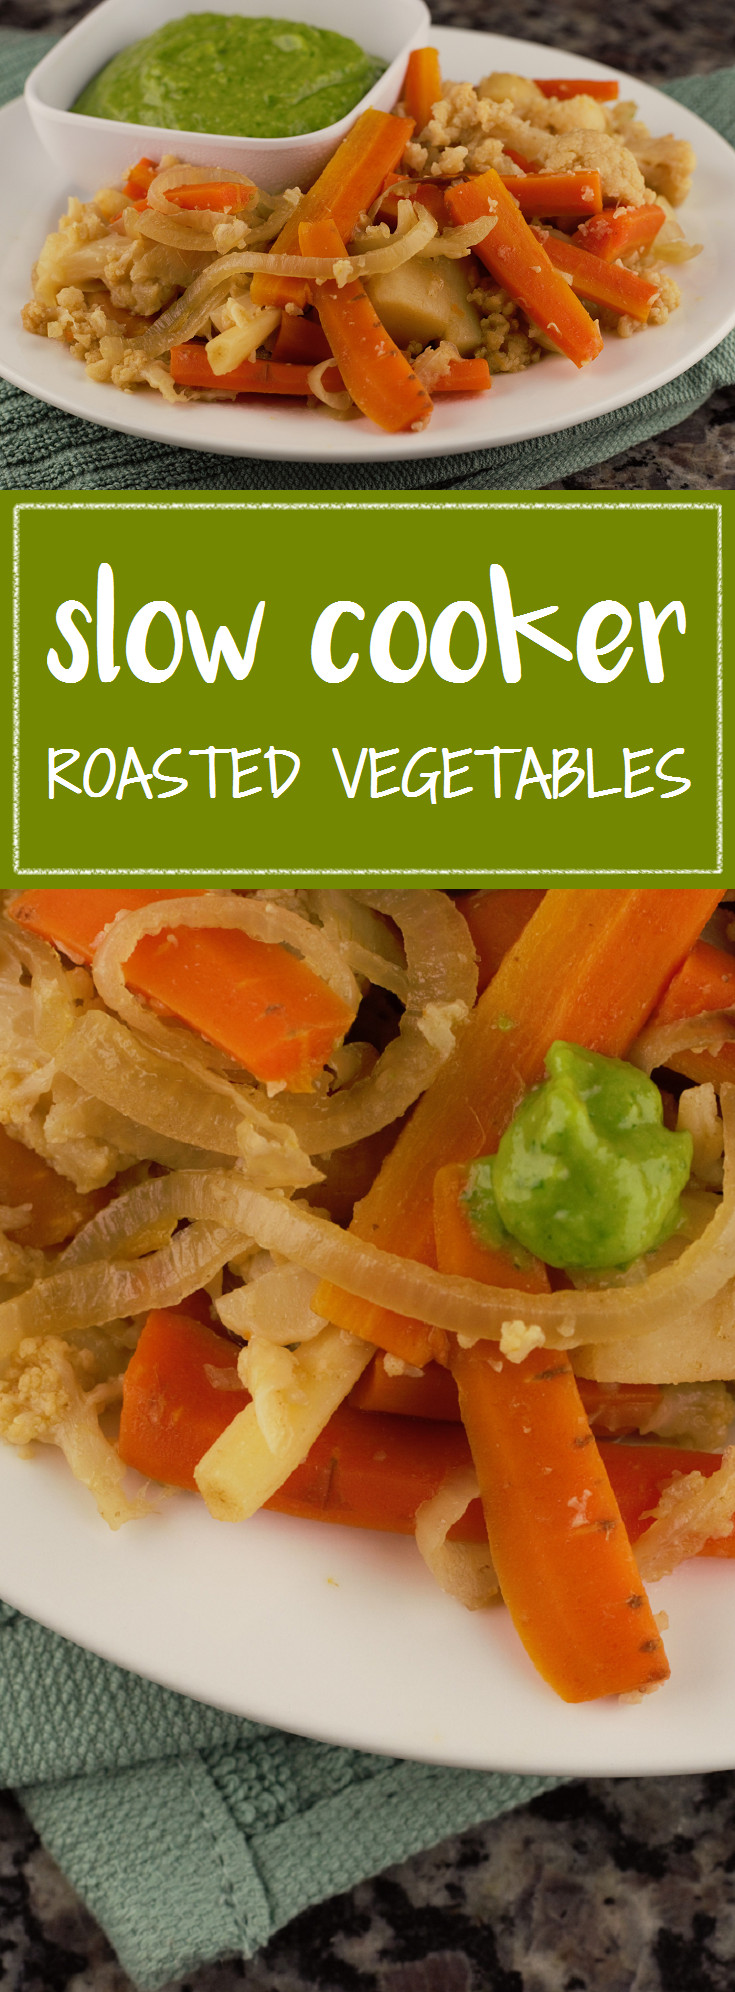 Slow Cooker Roasted Vegetables
 Slow Cooker Roasted Ve ables Mountain Cravings